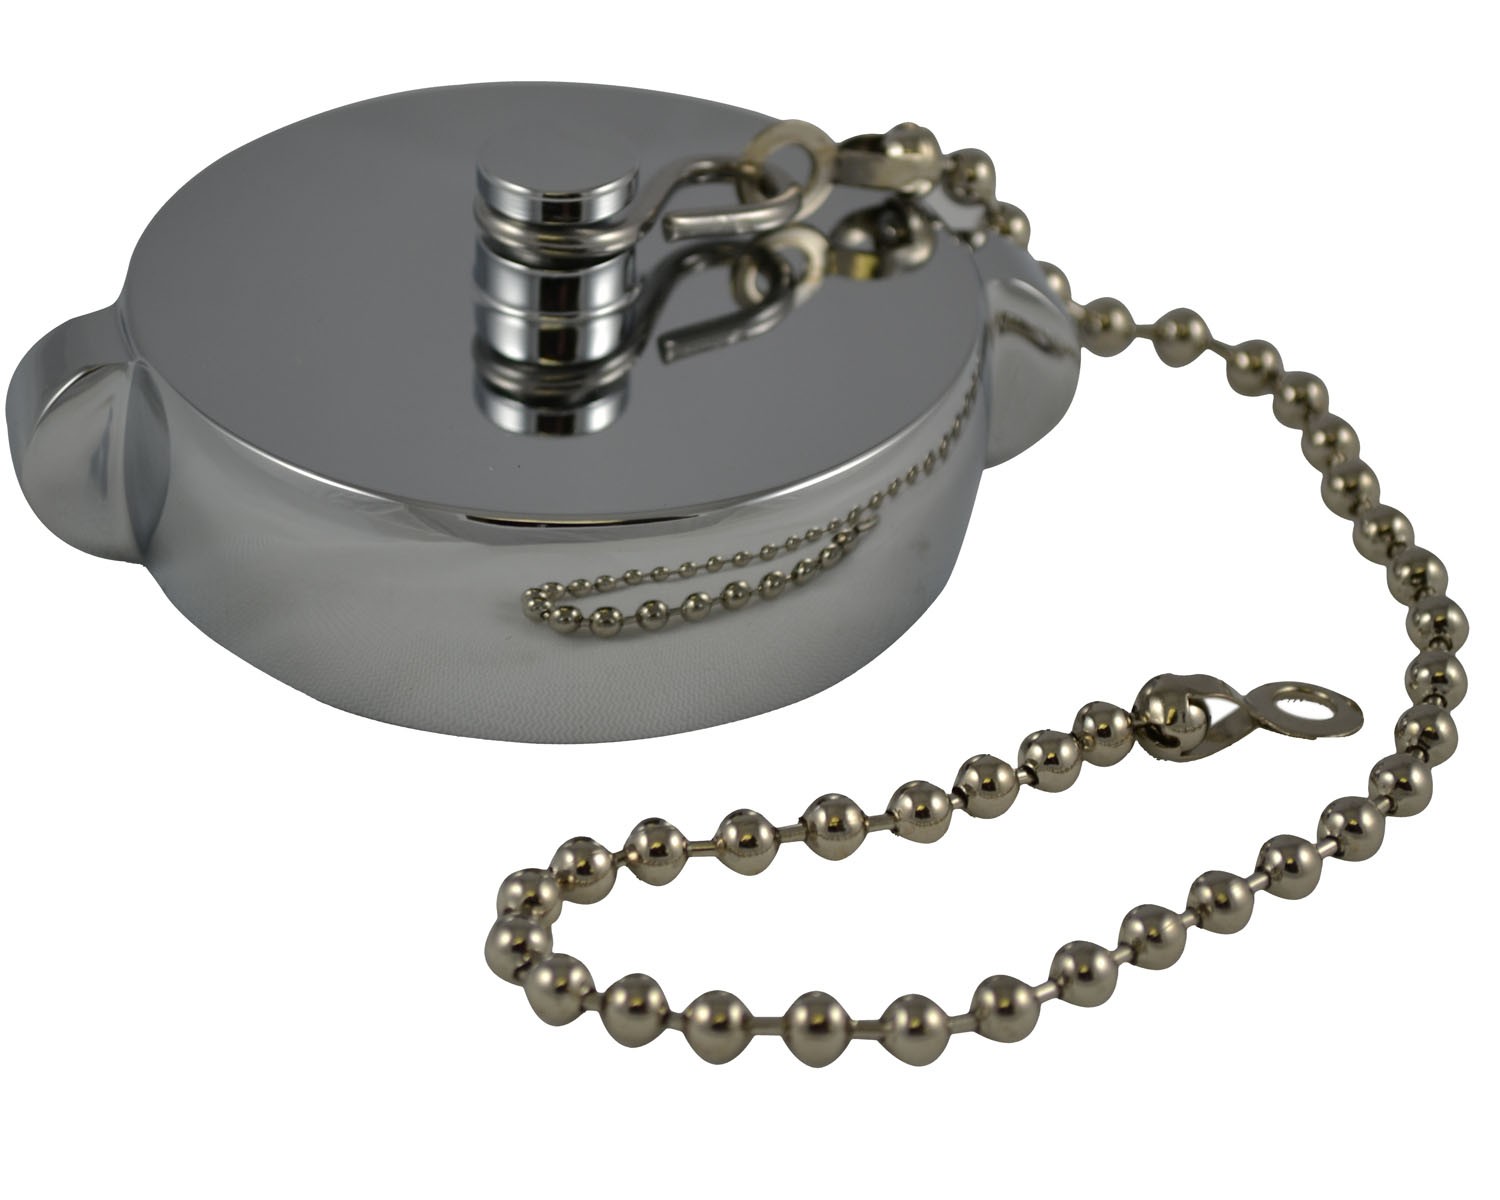 HCC28, 2.5 National Standard Thread ( NST) Female Cap Brass Chrome Plated with Chain, Rockerlug Tested to 500 psi